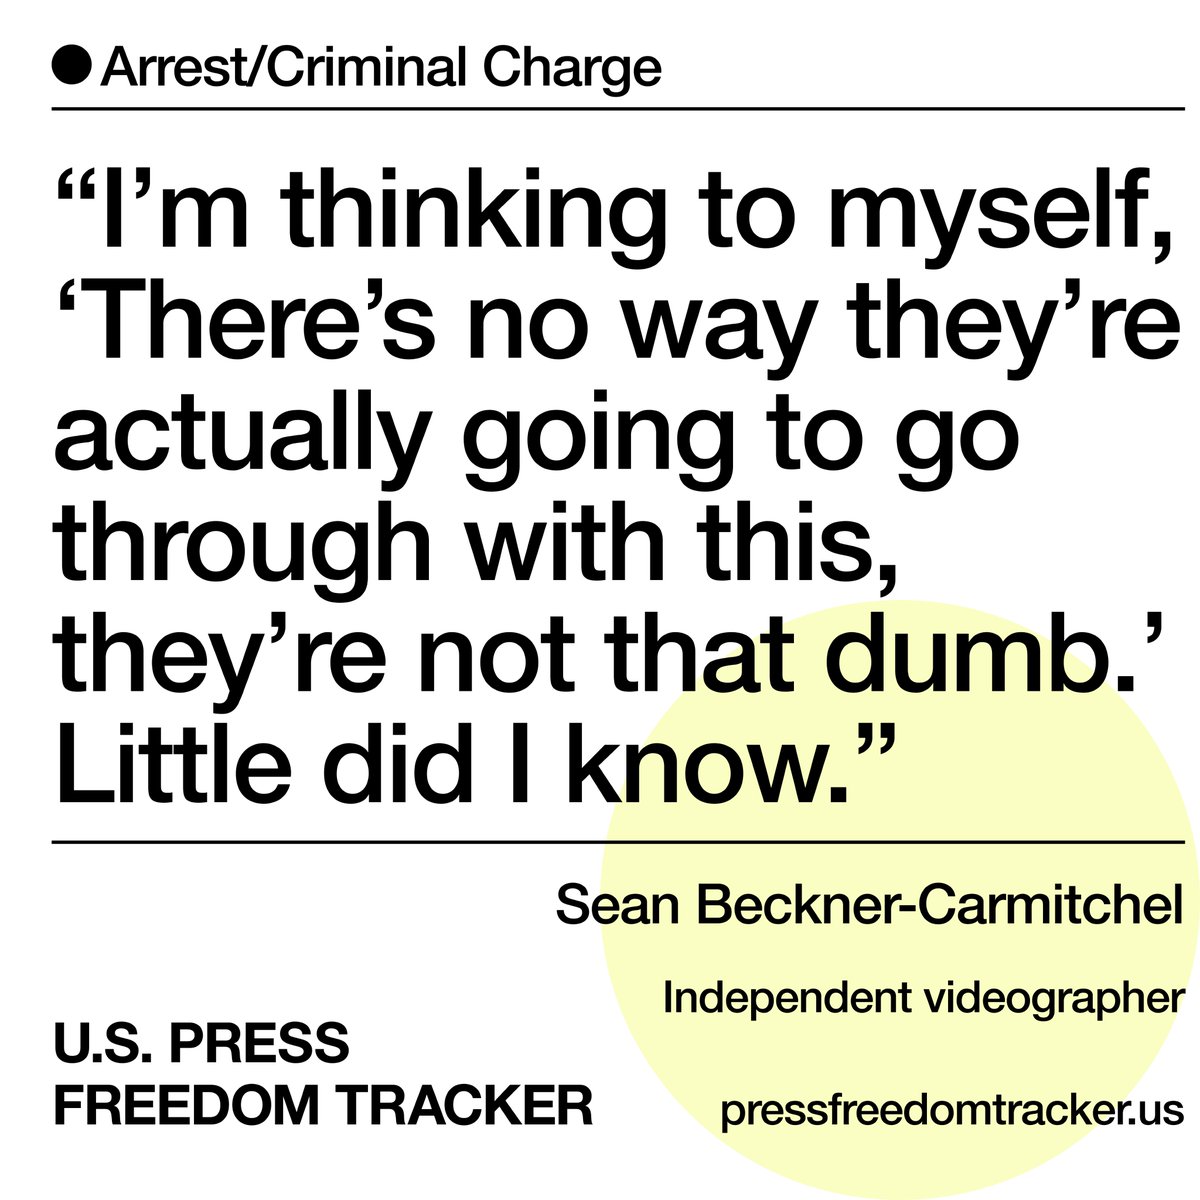 Independent videographer @ACatWithNews was arrested on Monday while reporting on student detainments ahead of a planned sit-in at @UCLA. He was charged with conspiracy to commit burglary but told the charges would be dropped. pressfreedomtracker.us/all-incidents/…